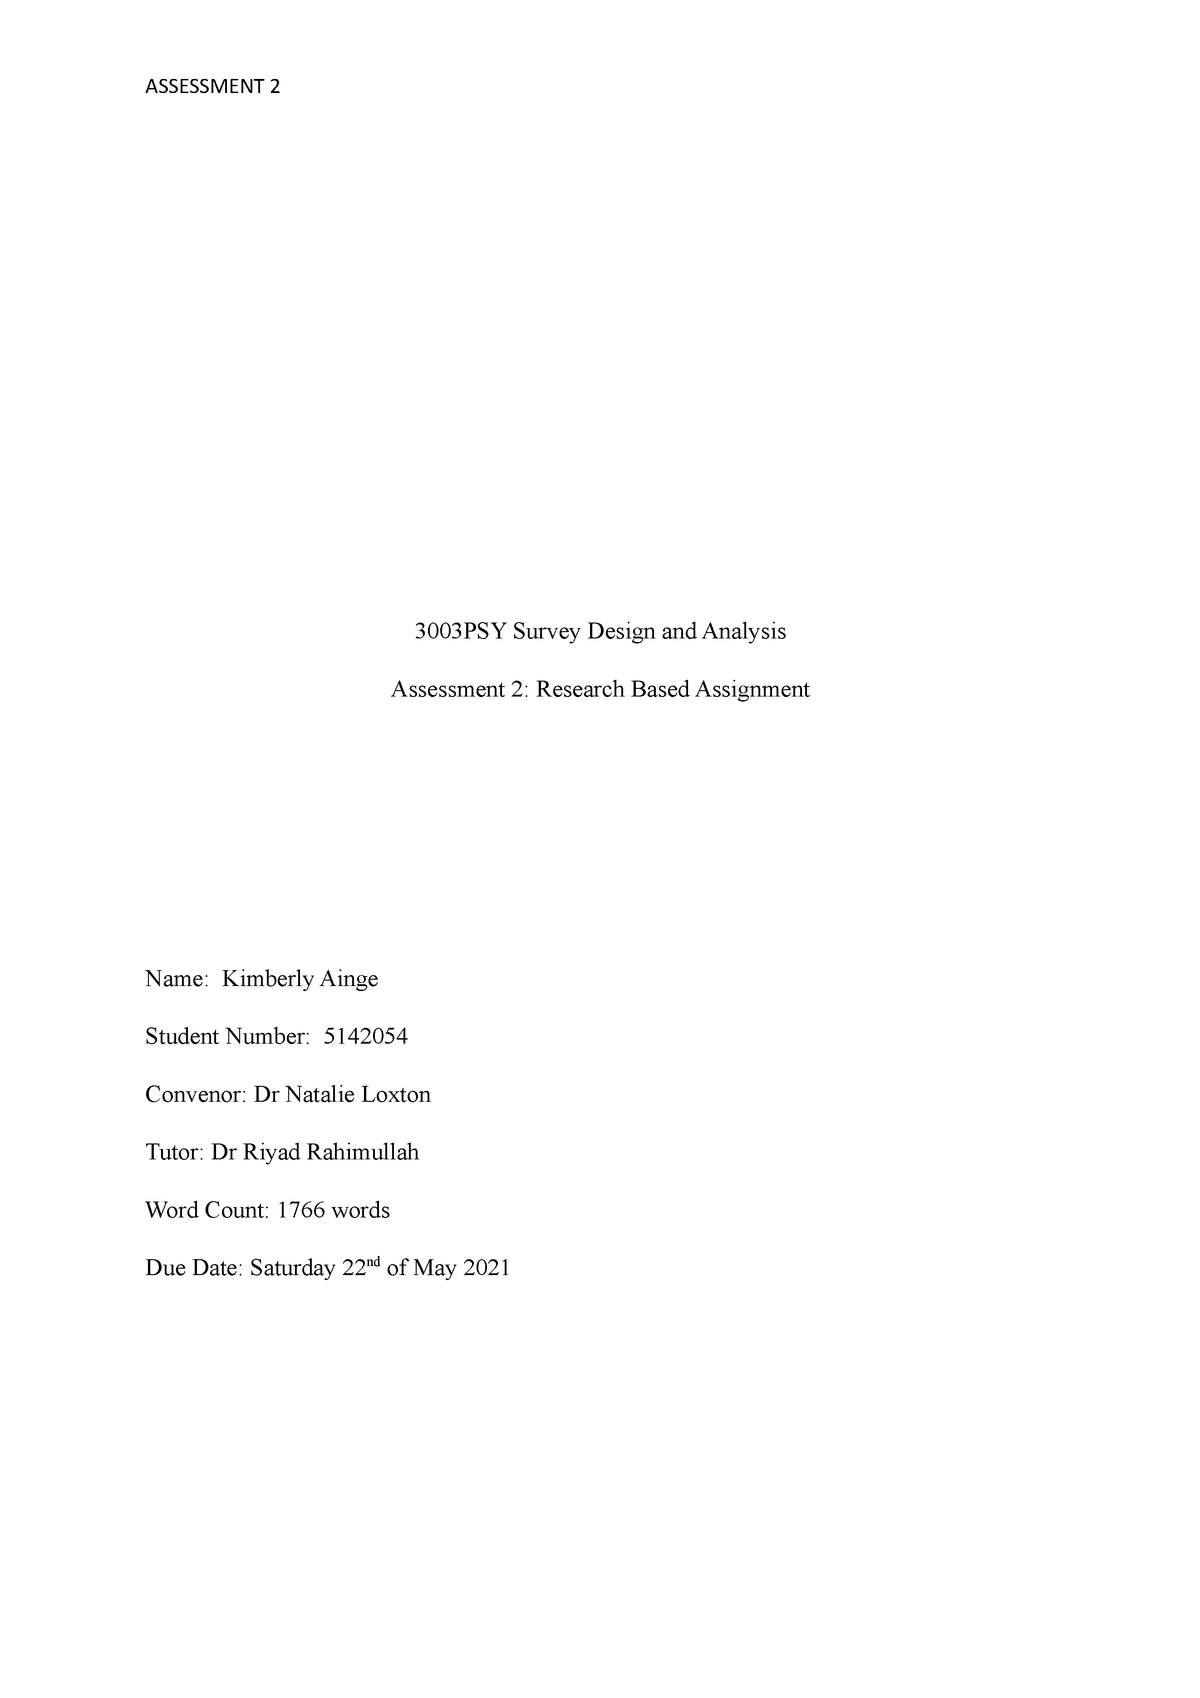 griffith university thesis format